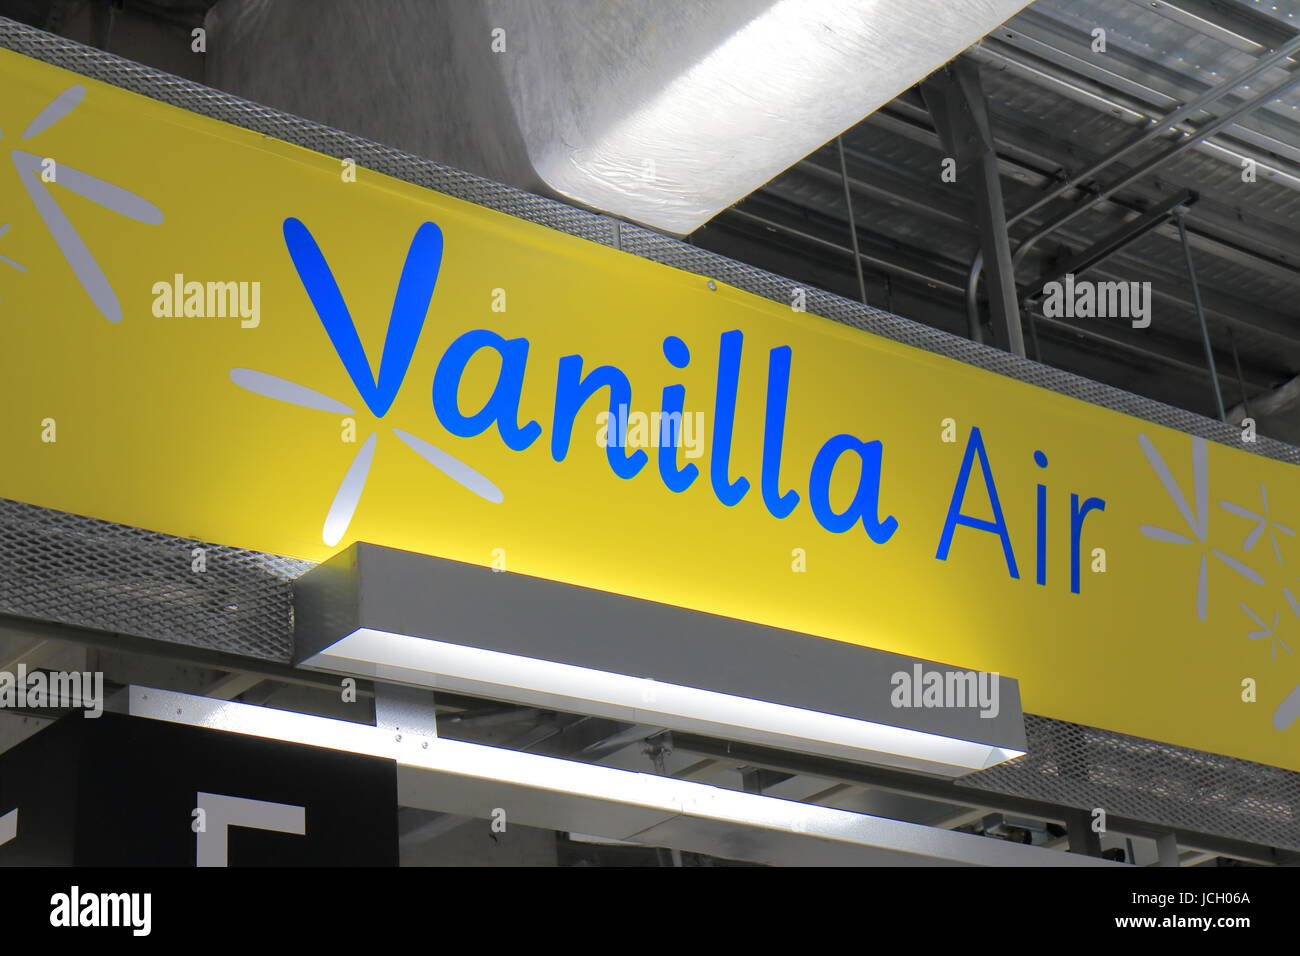 Vanilla Air aviation company. Vanilla Air s a low cost airline in Japan wholly owned by ANA All Nippon Airways. Stock Photo